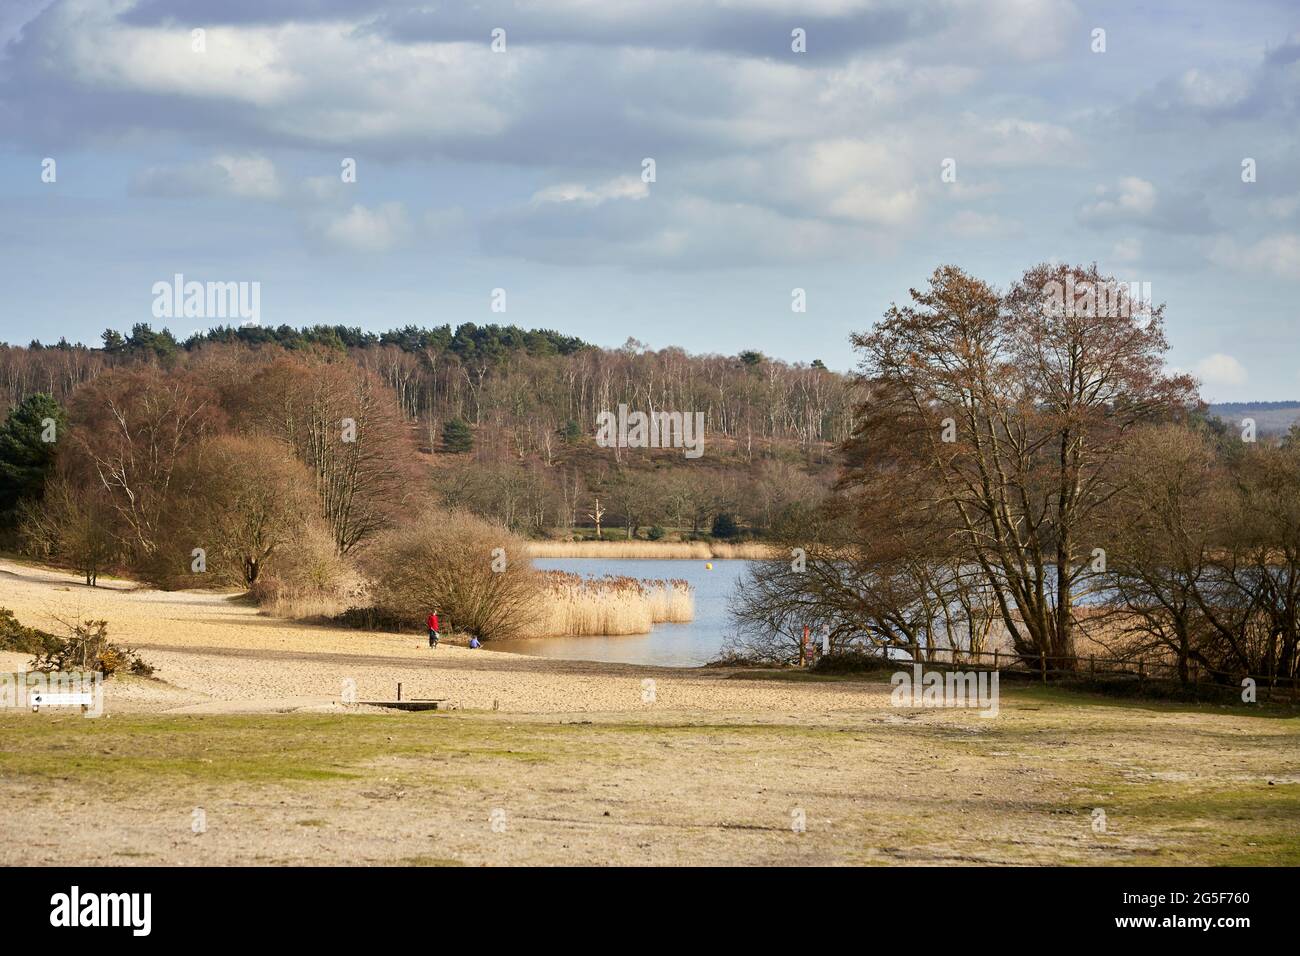 Scenery at Frensham Great Pond, Frensham Common, Waverley, Surrey, UK, with lake and sandy beach area, a local beauty spot and recreational area Stock Photo